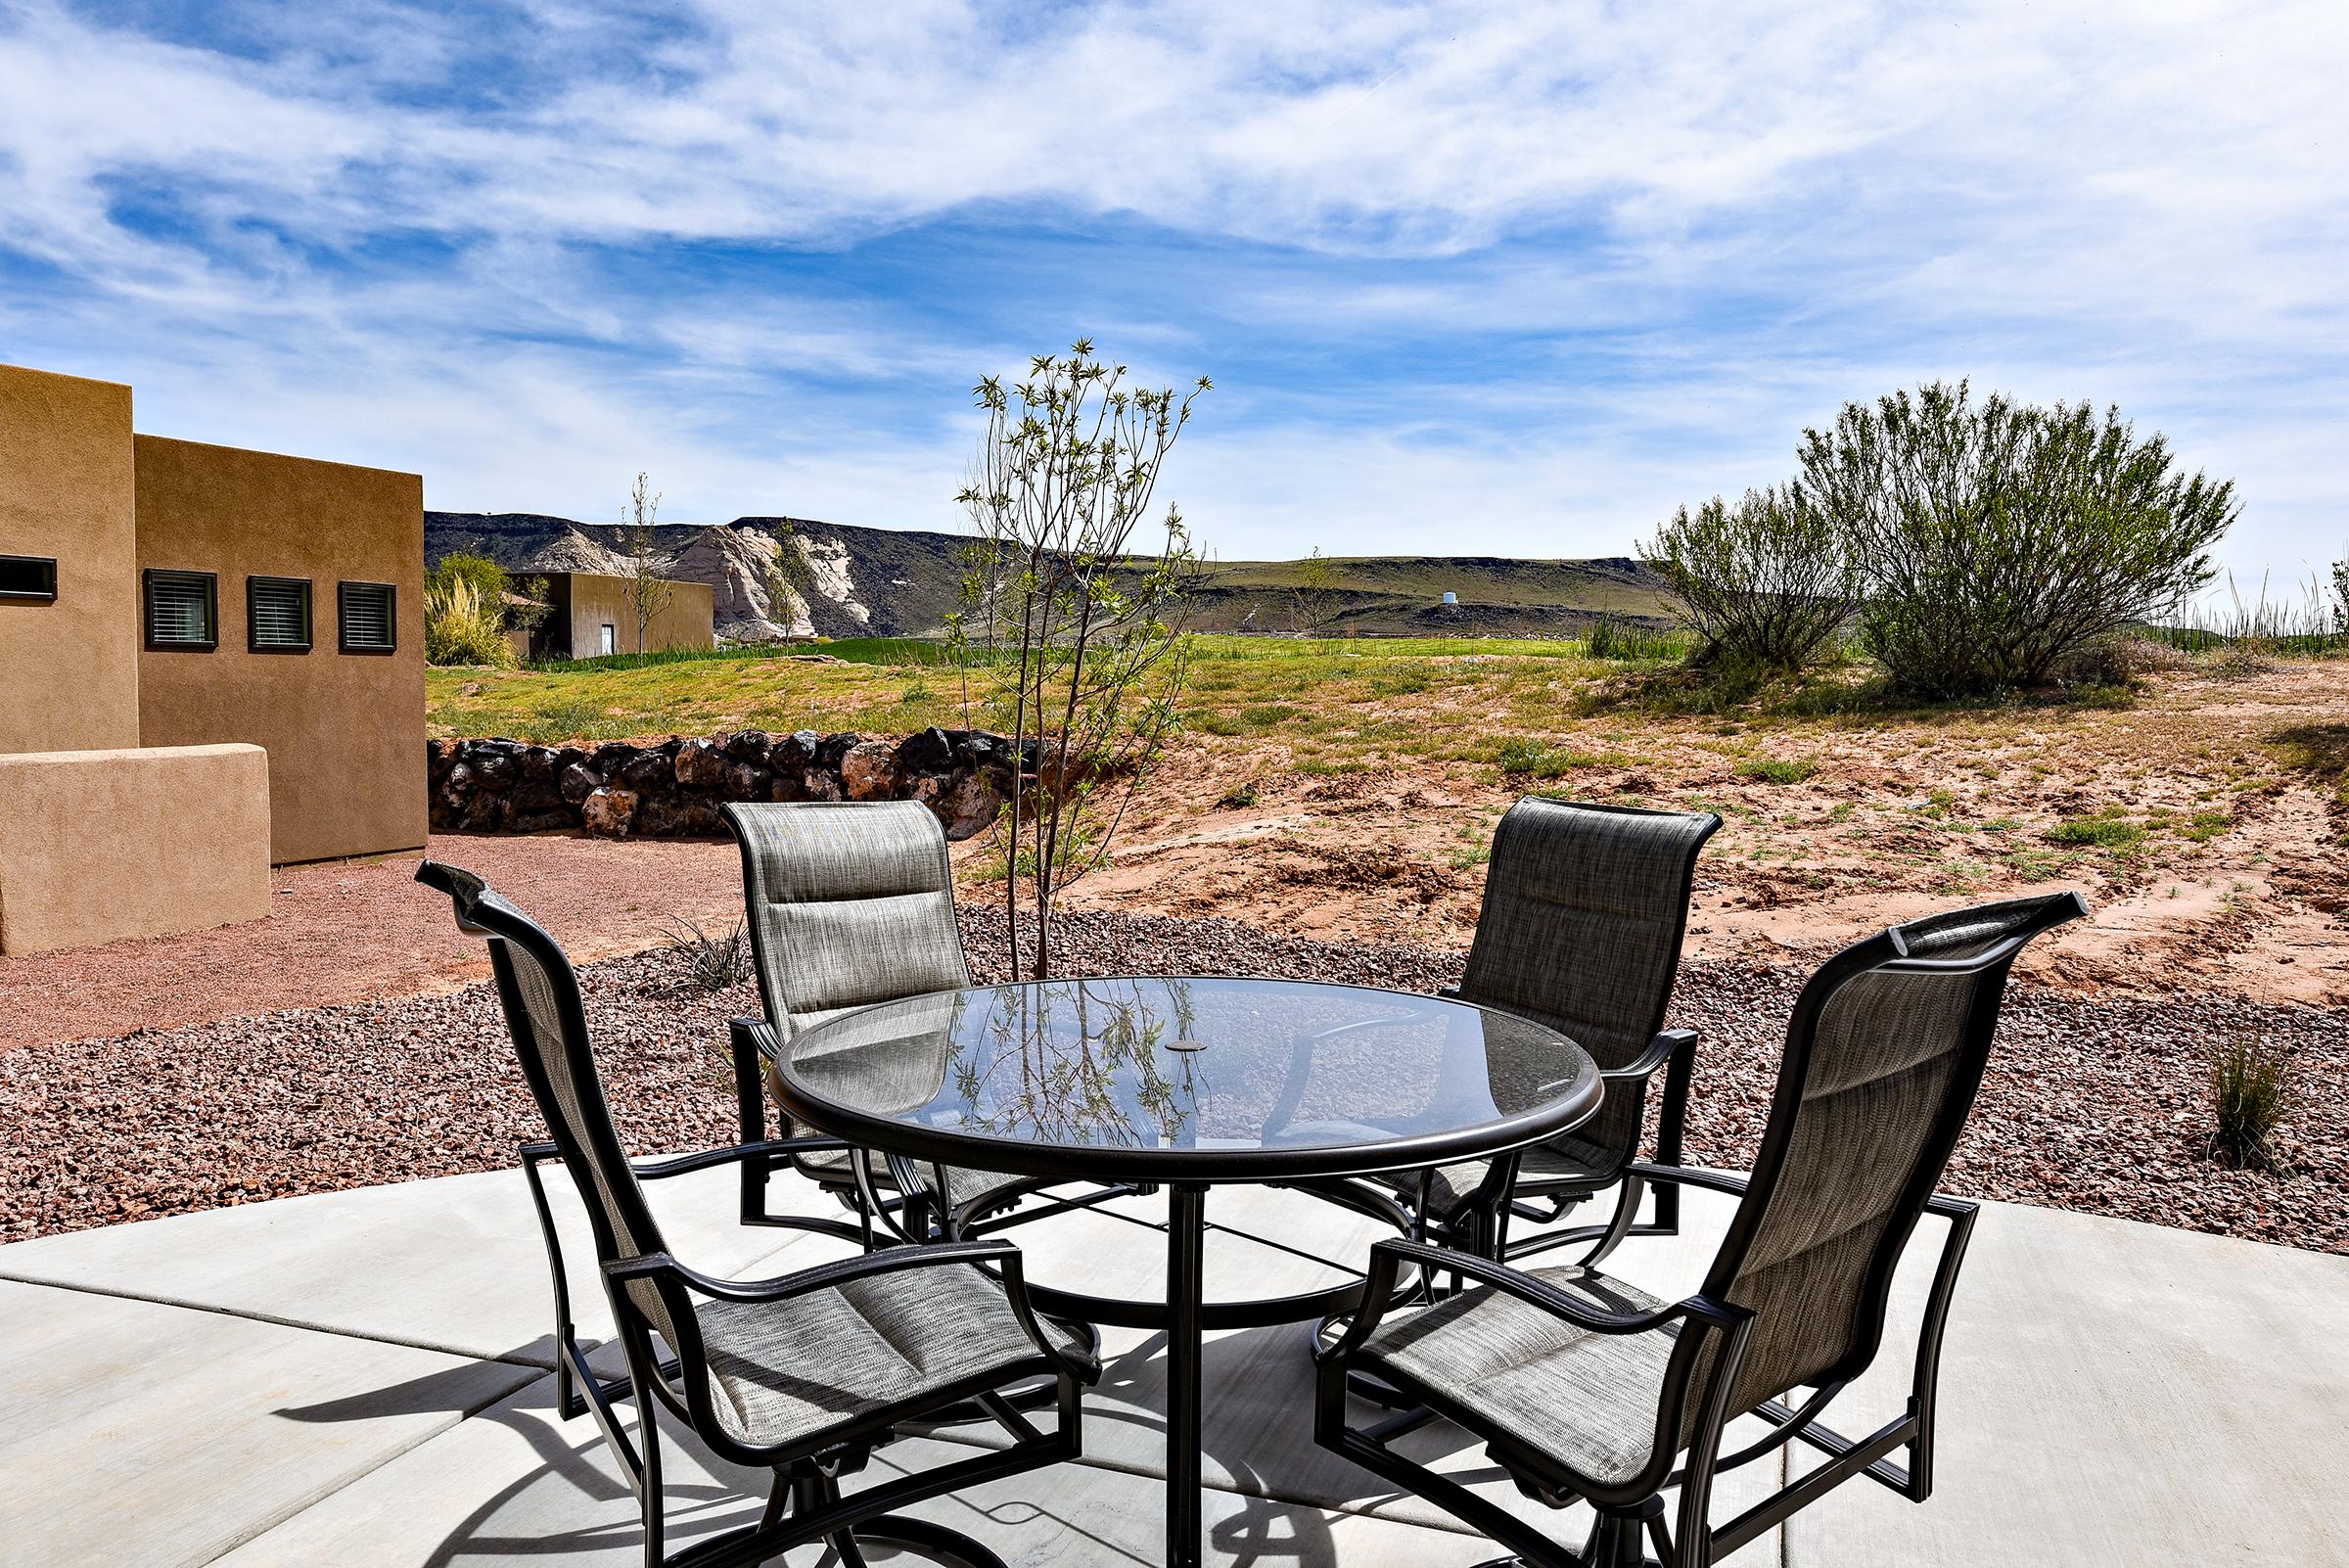 The Back Patio includes a dining table that can comfortably accommodate 4 adults.